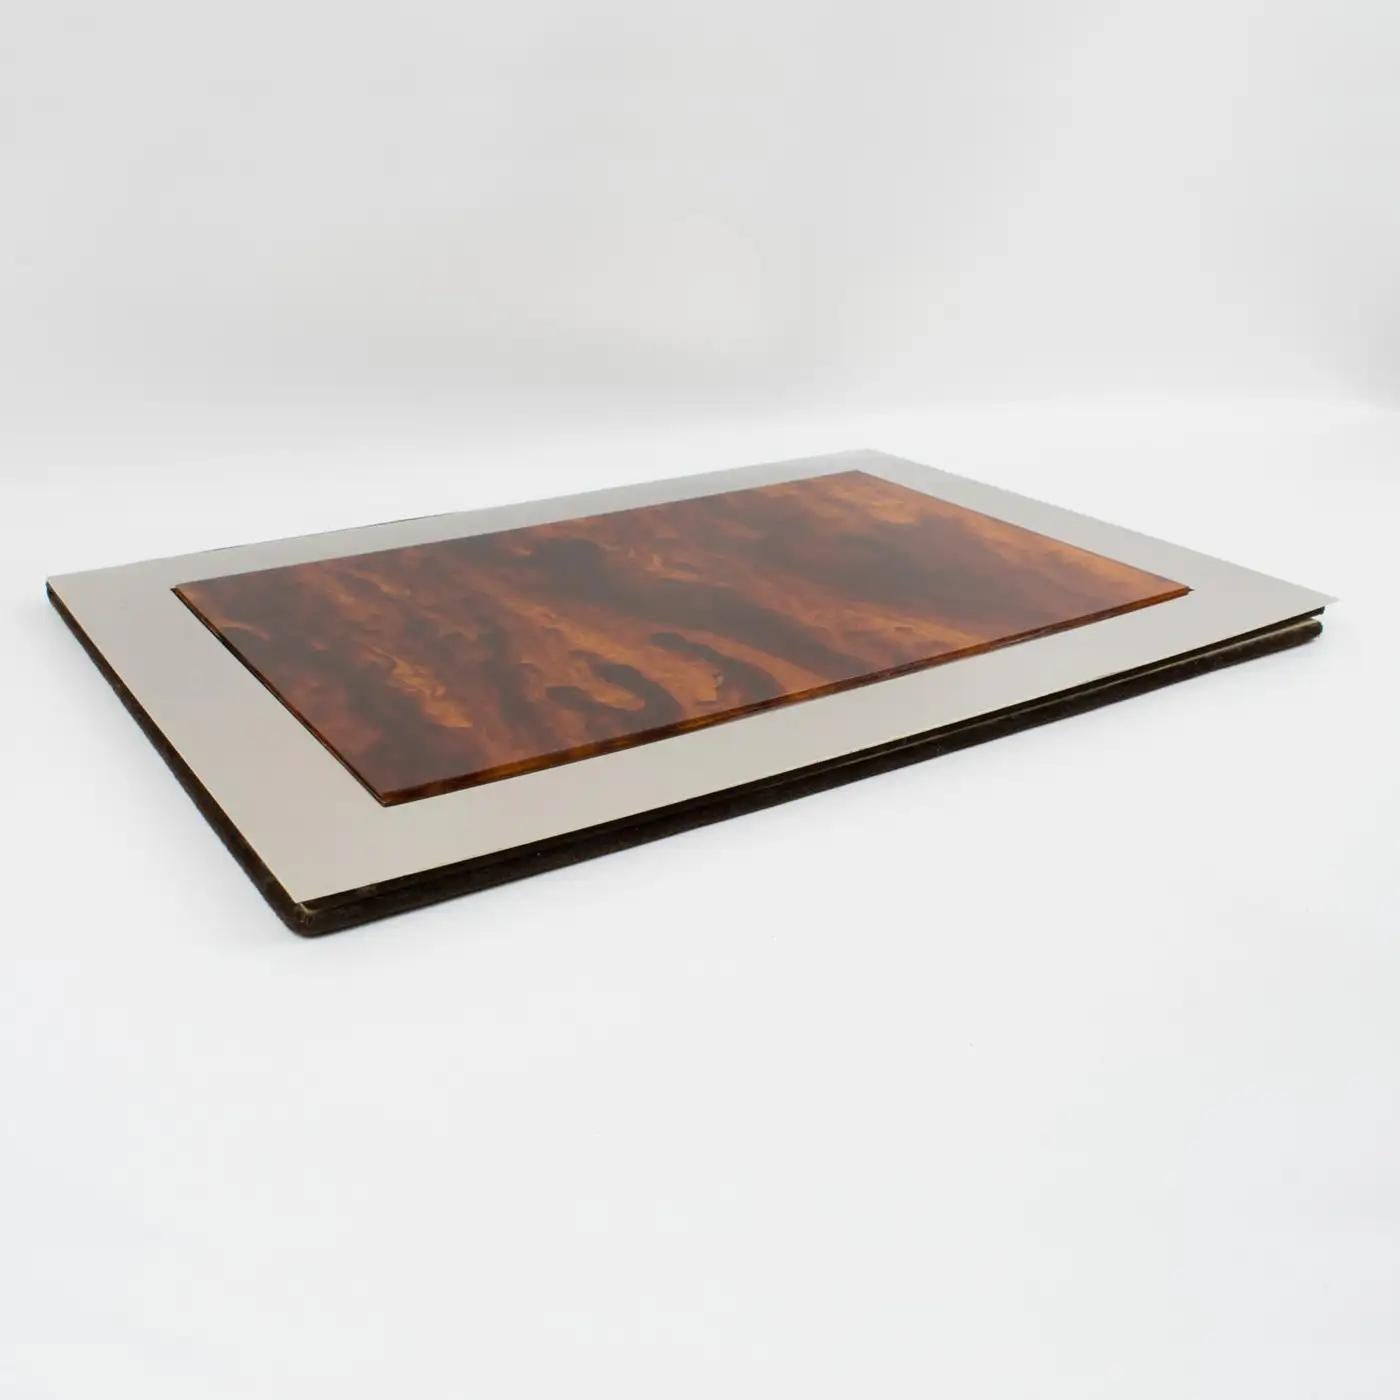 Late 20th Century Modernist Chrome and Tortoiseshell Lucite Desk Pad, France 1970s For Sale